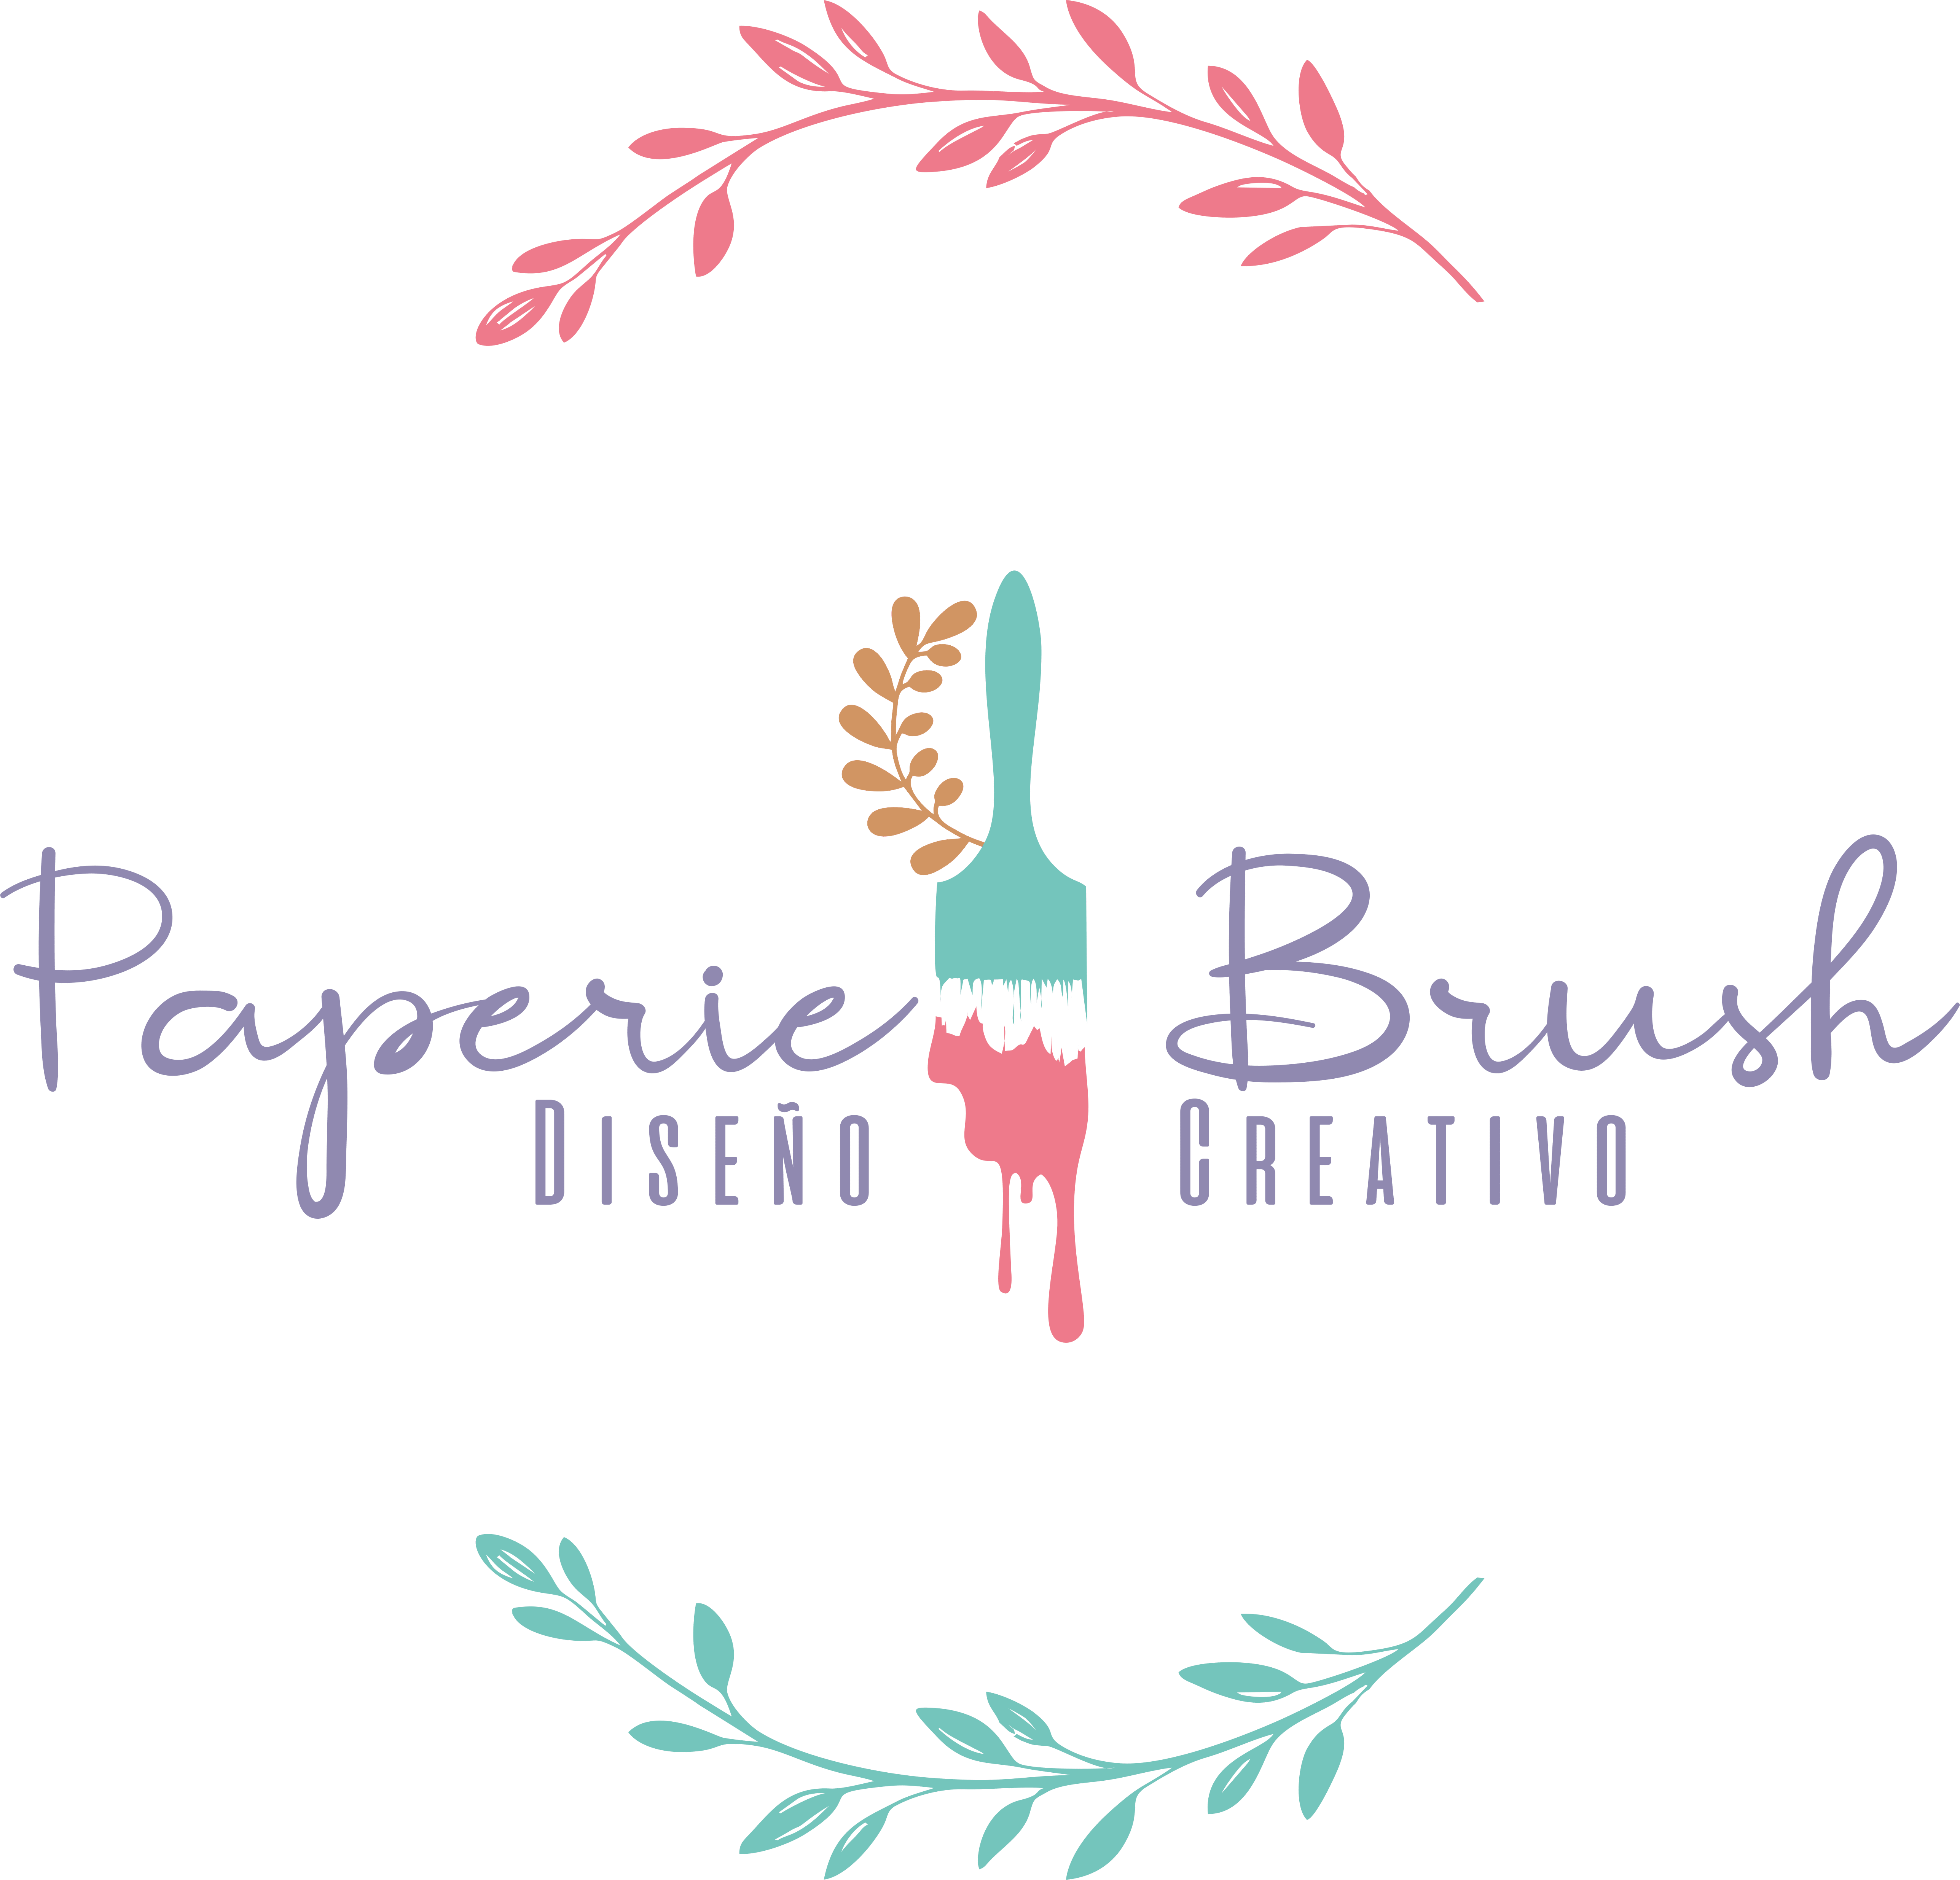 Paperie Brush